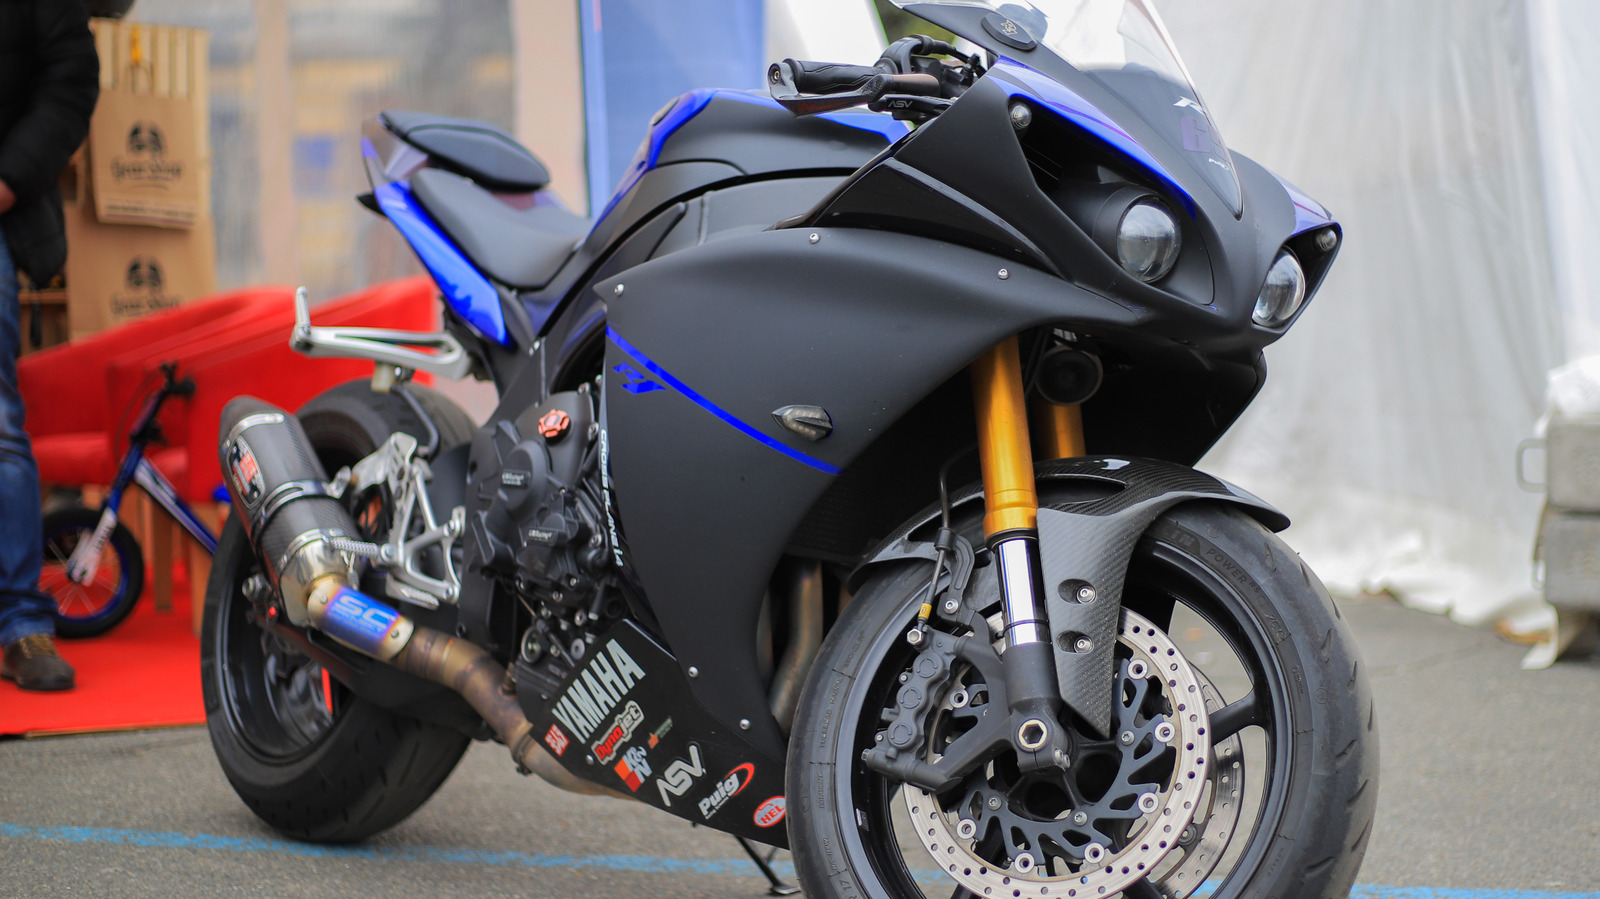 What Does YZF Stand For On Yamaha Motorcycles?